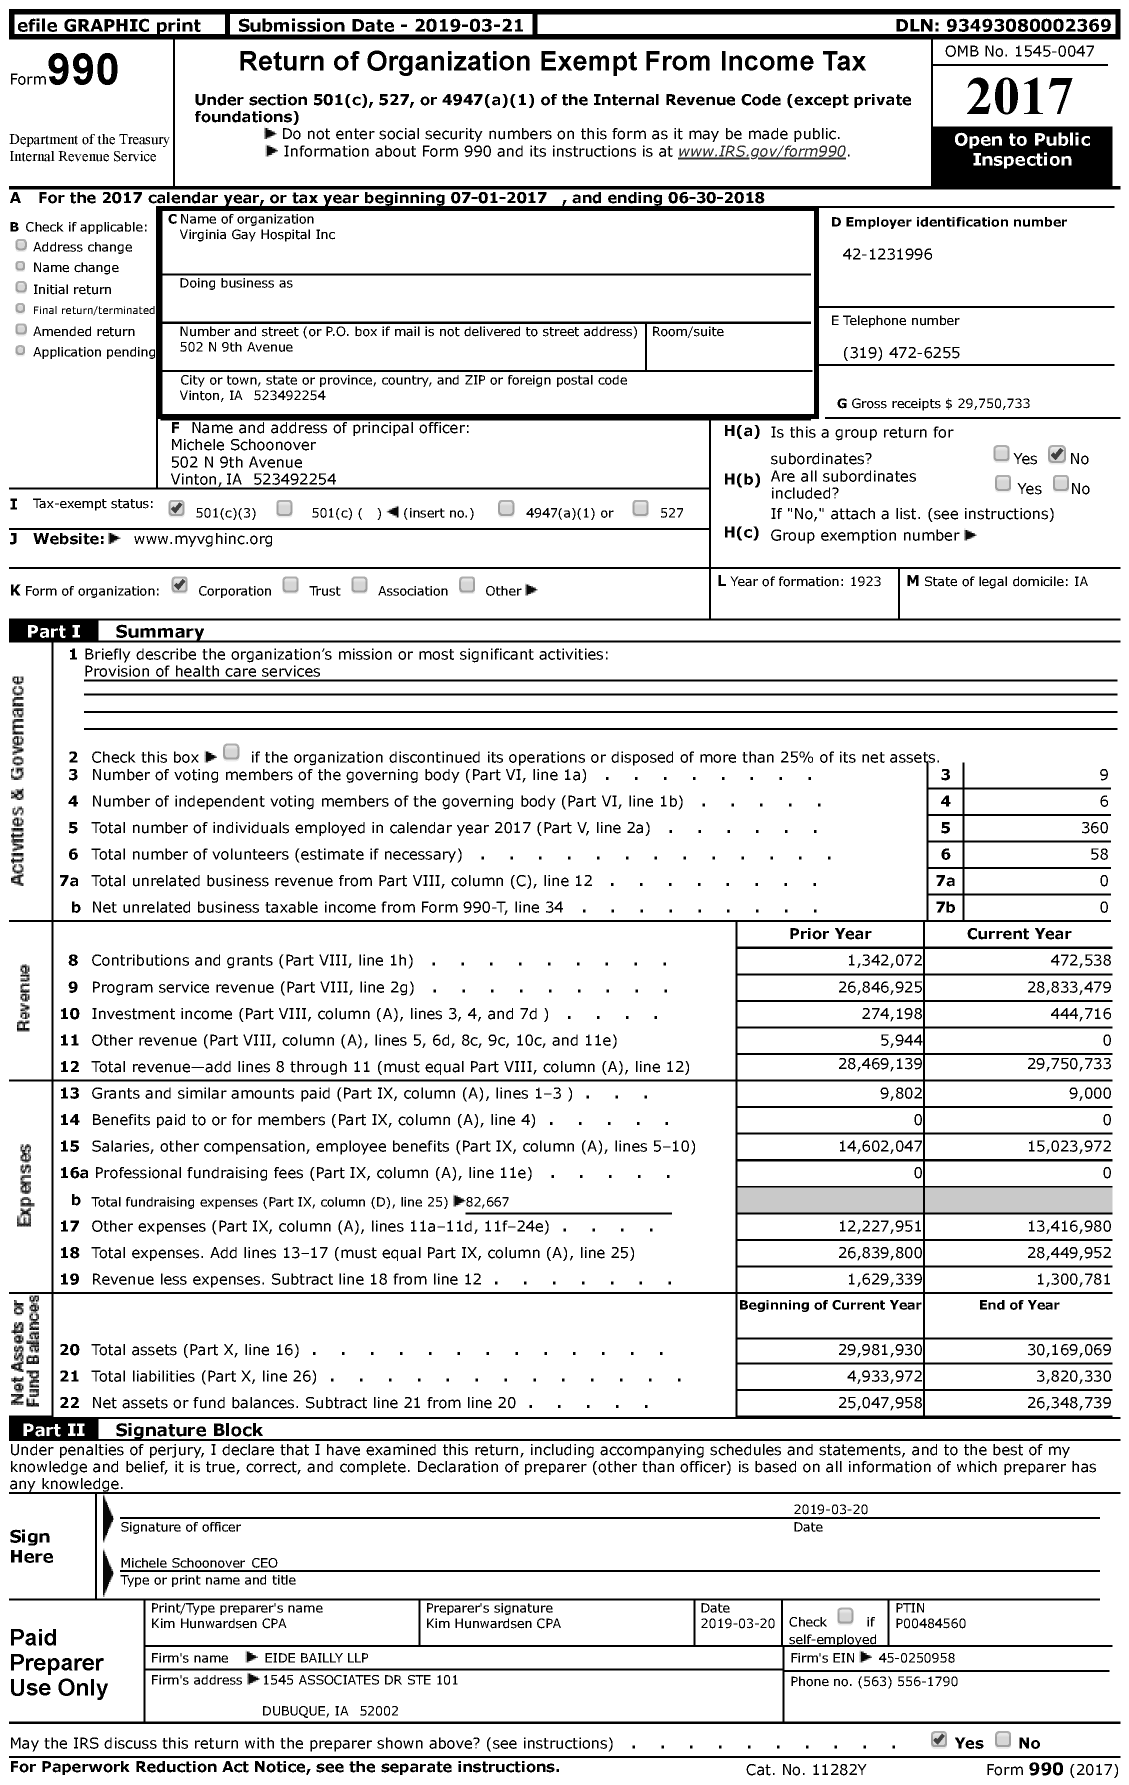 Image of first page of 2017 Form 990 for Virginia Gay Hospital (VGH)